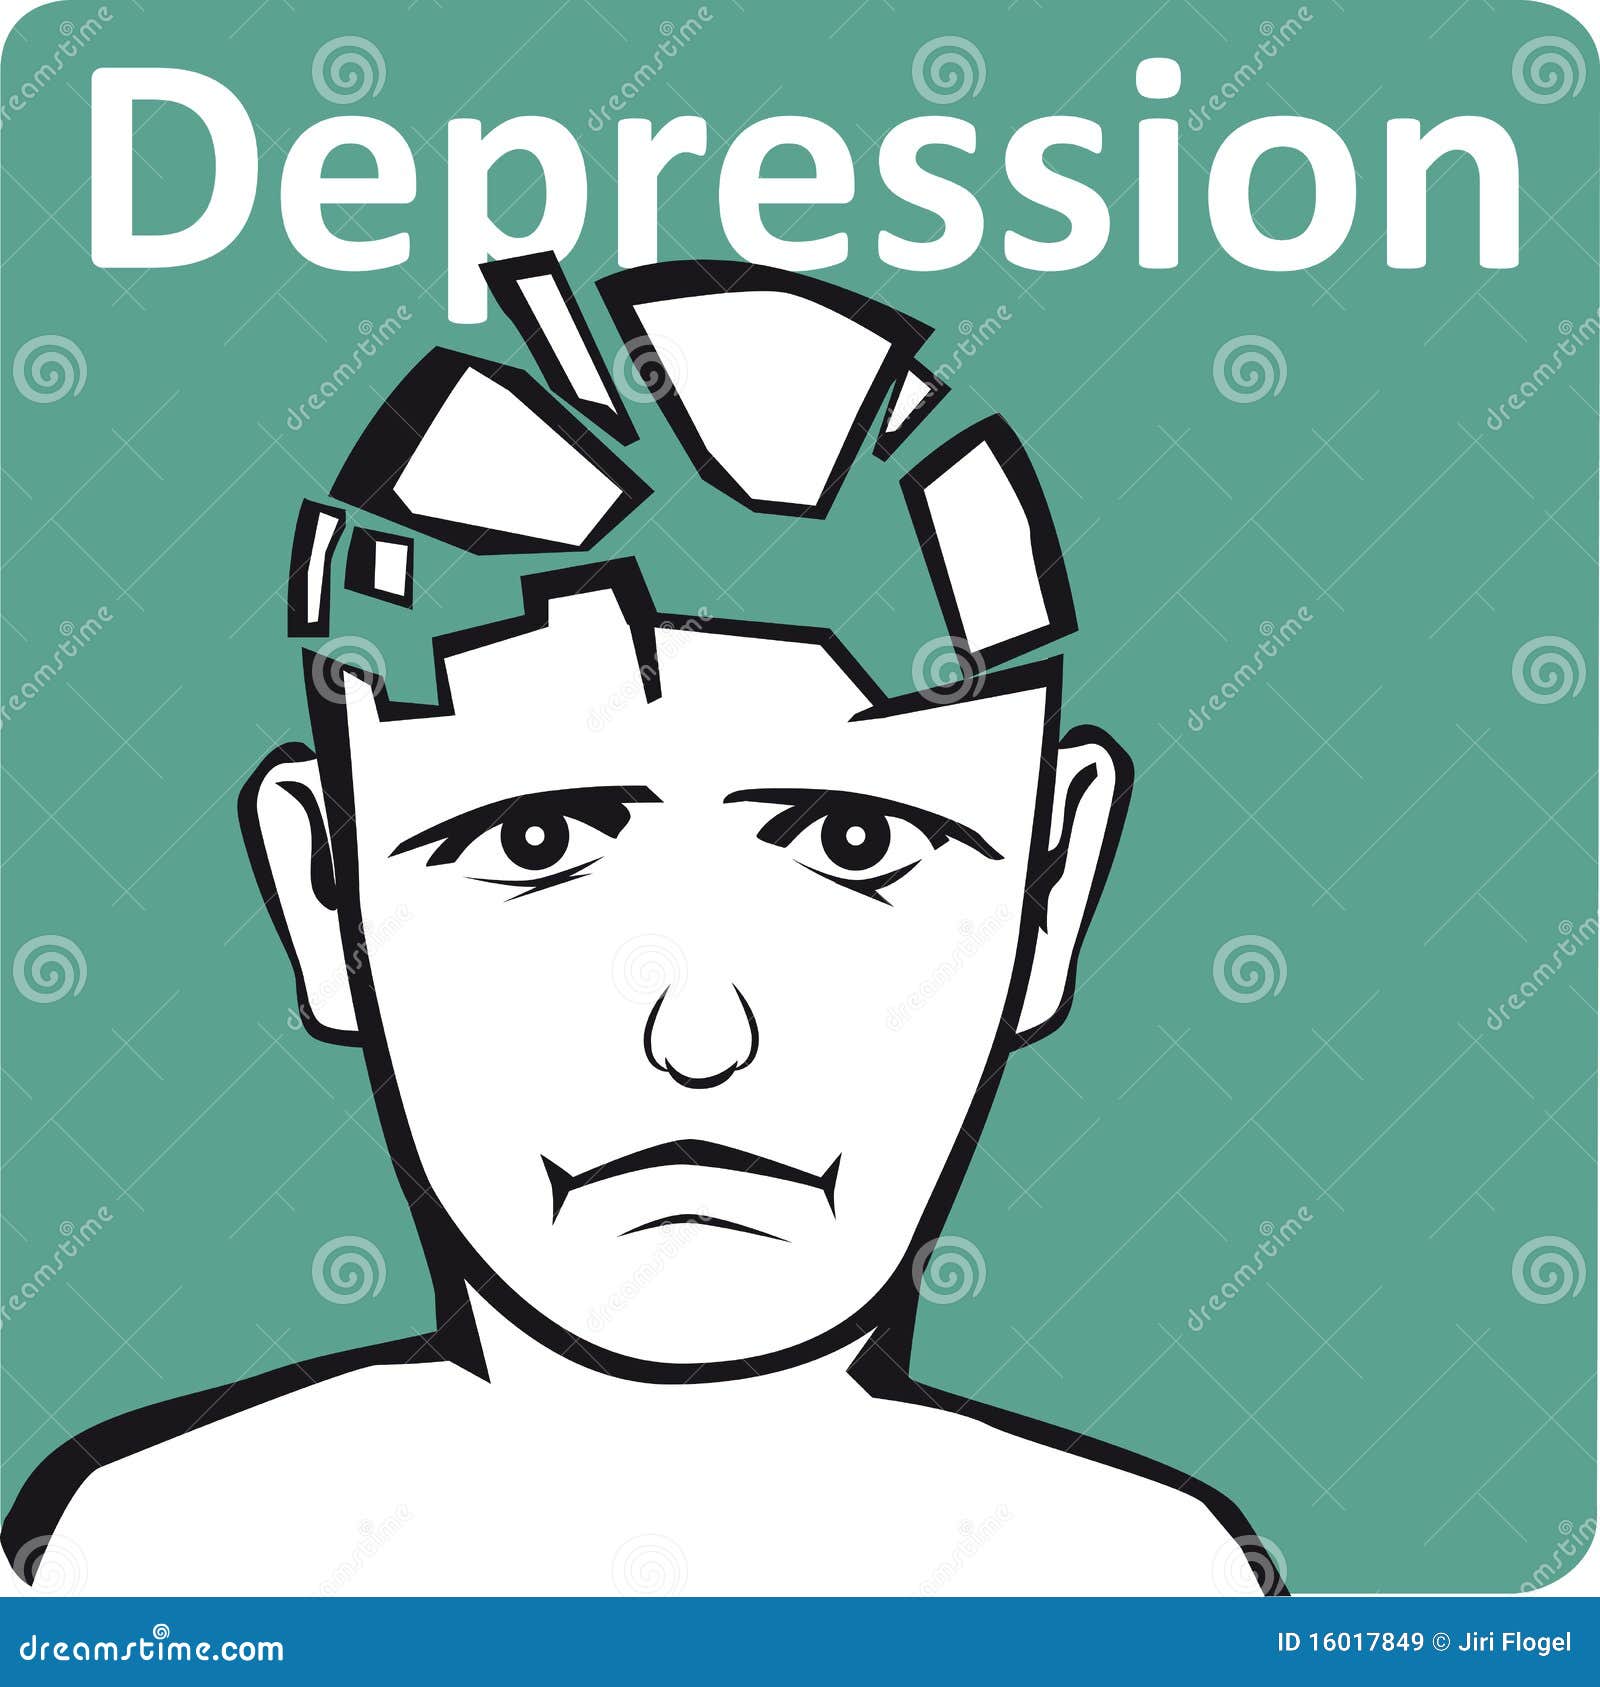 Depression stock vector. Illustration of alone, people - 16017849